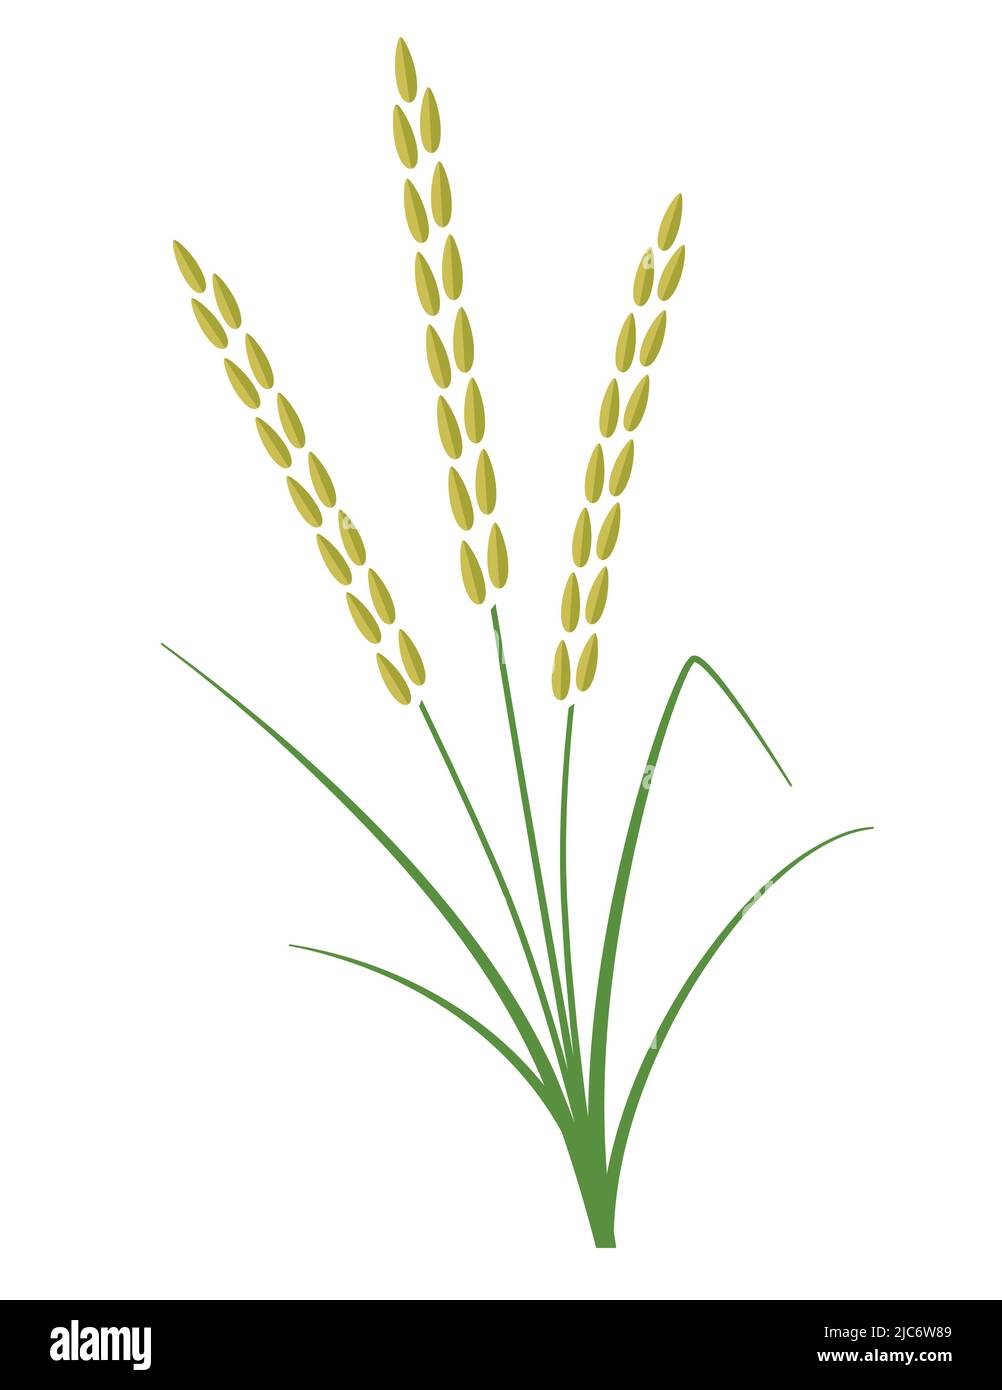 Ripe rice plant symbol for agriculture and rice farming vector illustration icon Stock Vector